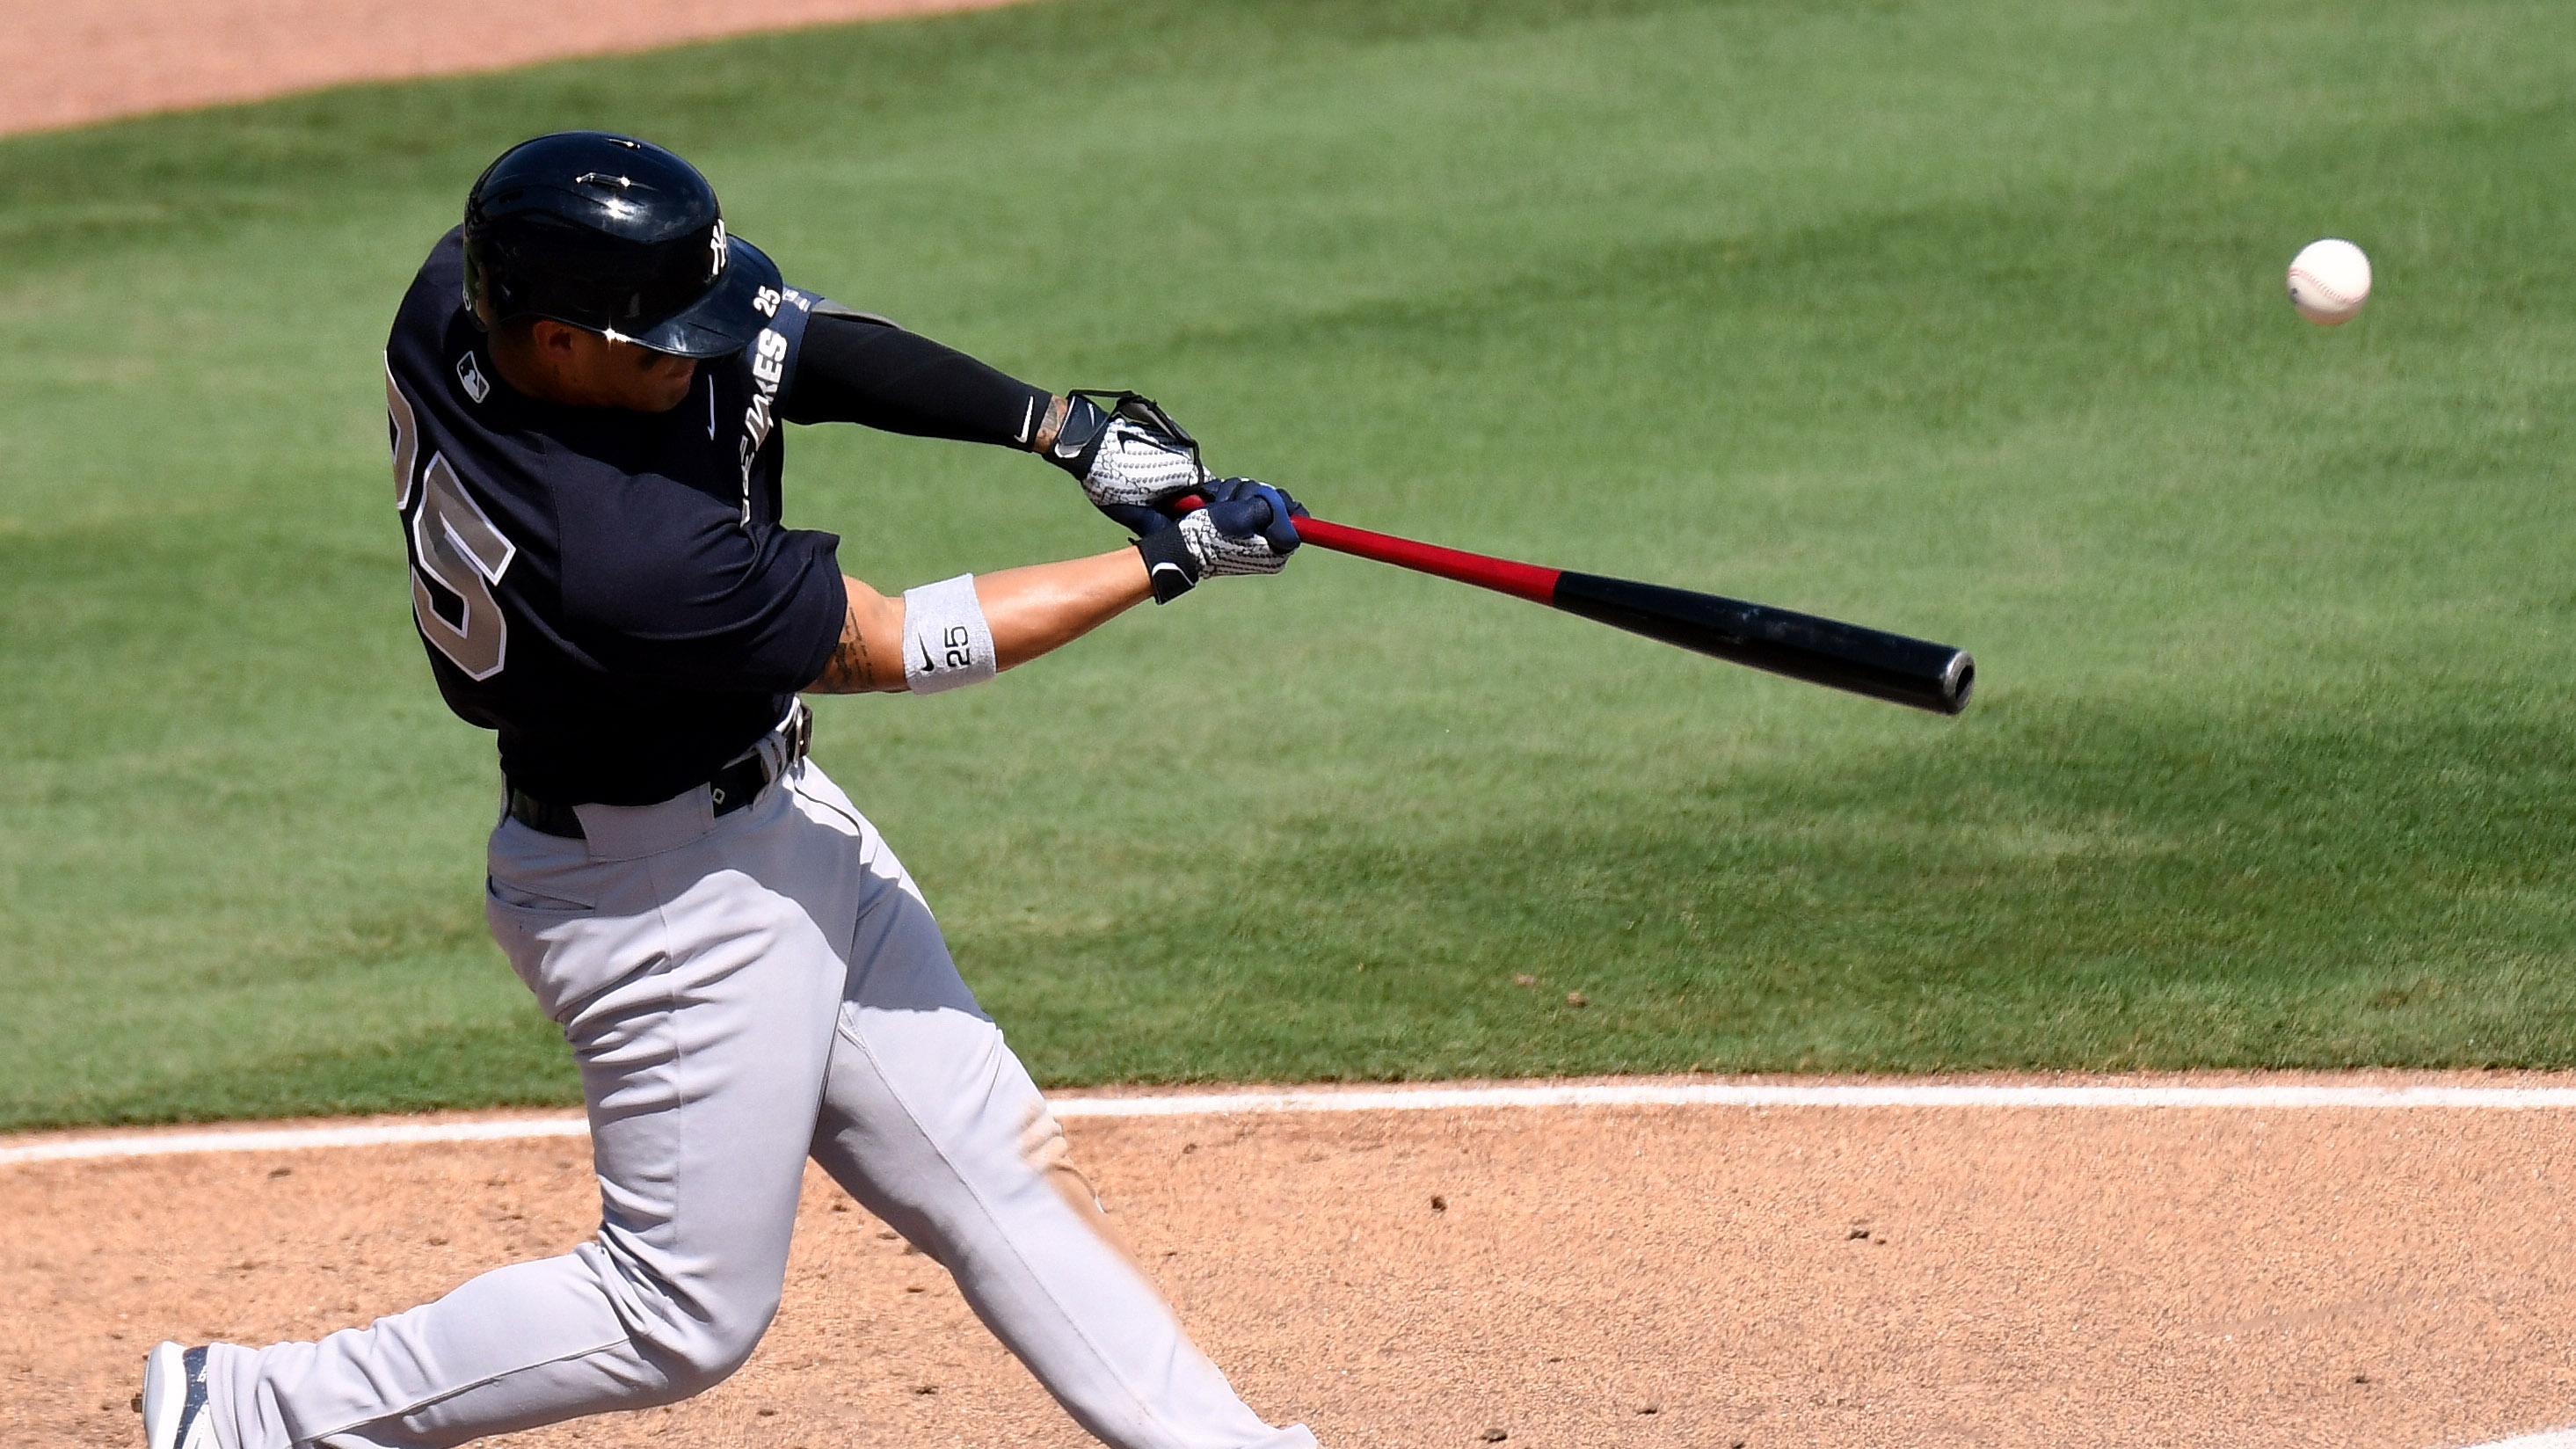 Gleyber Torres lines a base hit vs. Orioles in spring training / Jonathan Dyer/USA TODAY